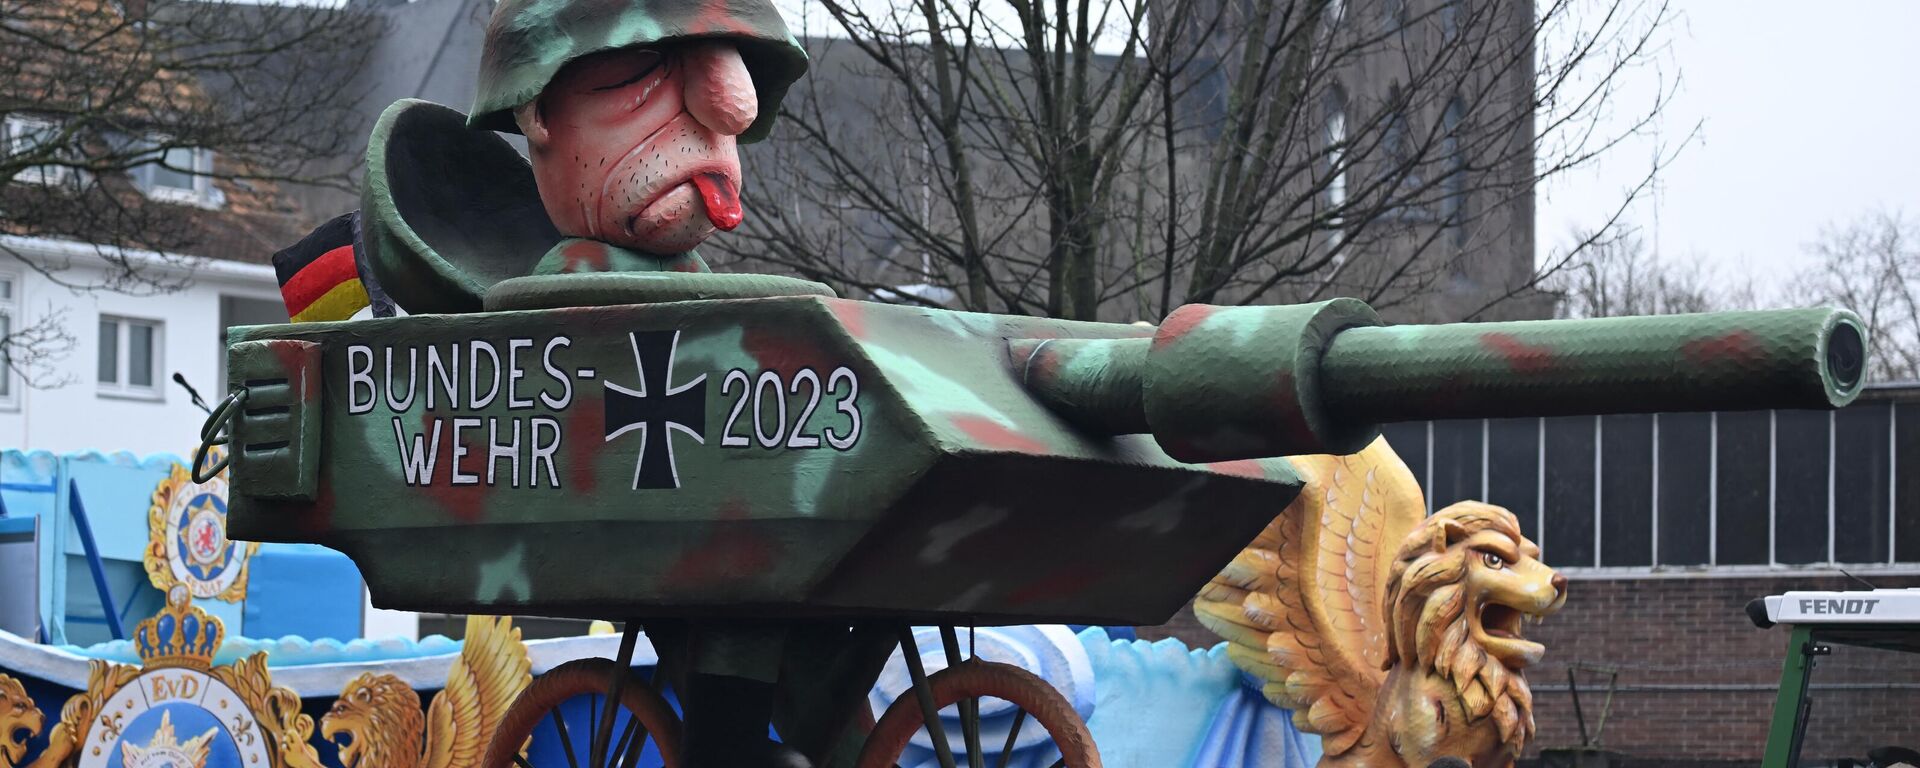 A carnival float mocks the current condition of the German armed Forces' military equipment during a Rose Monday street carnival parade in Duesseldorf, western Germany, on February 20, 2023.  - Sputnik International, 1920, 17.07.2023